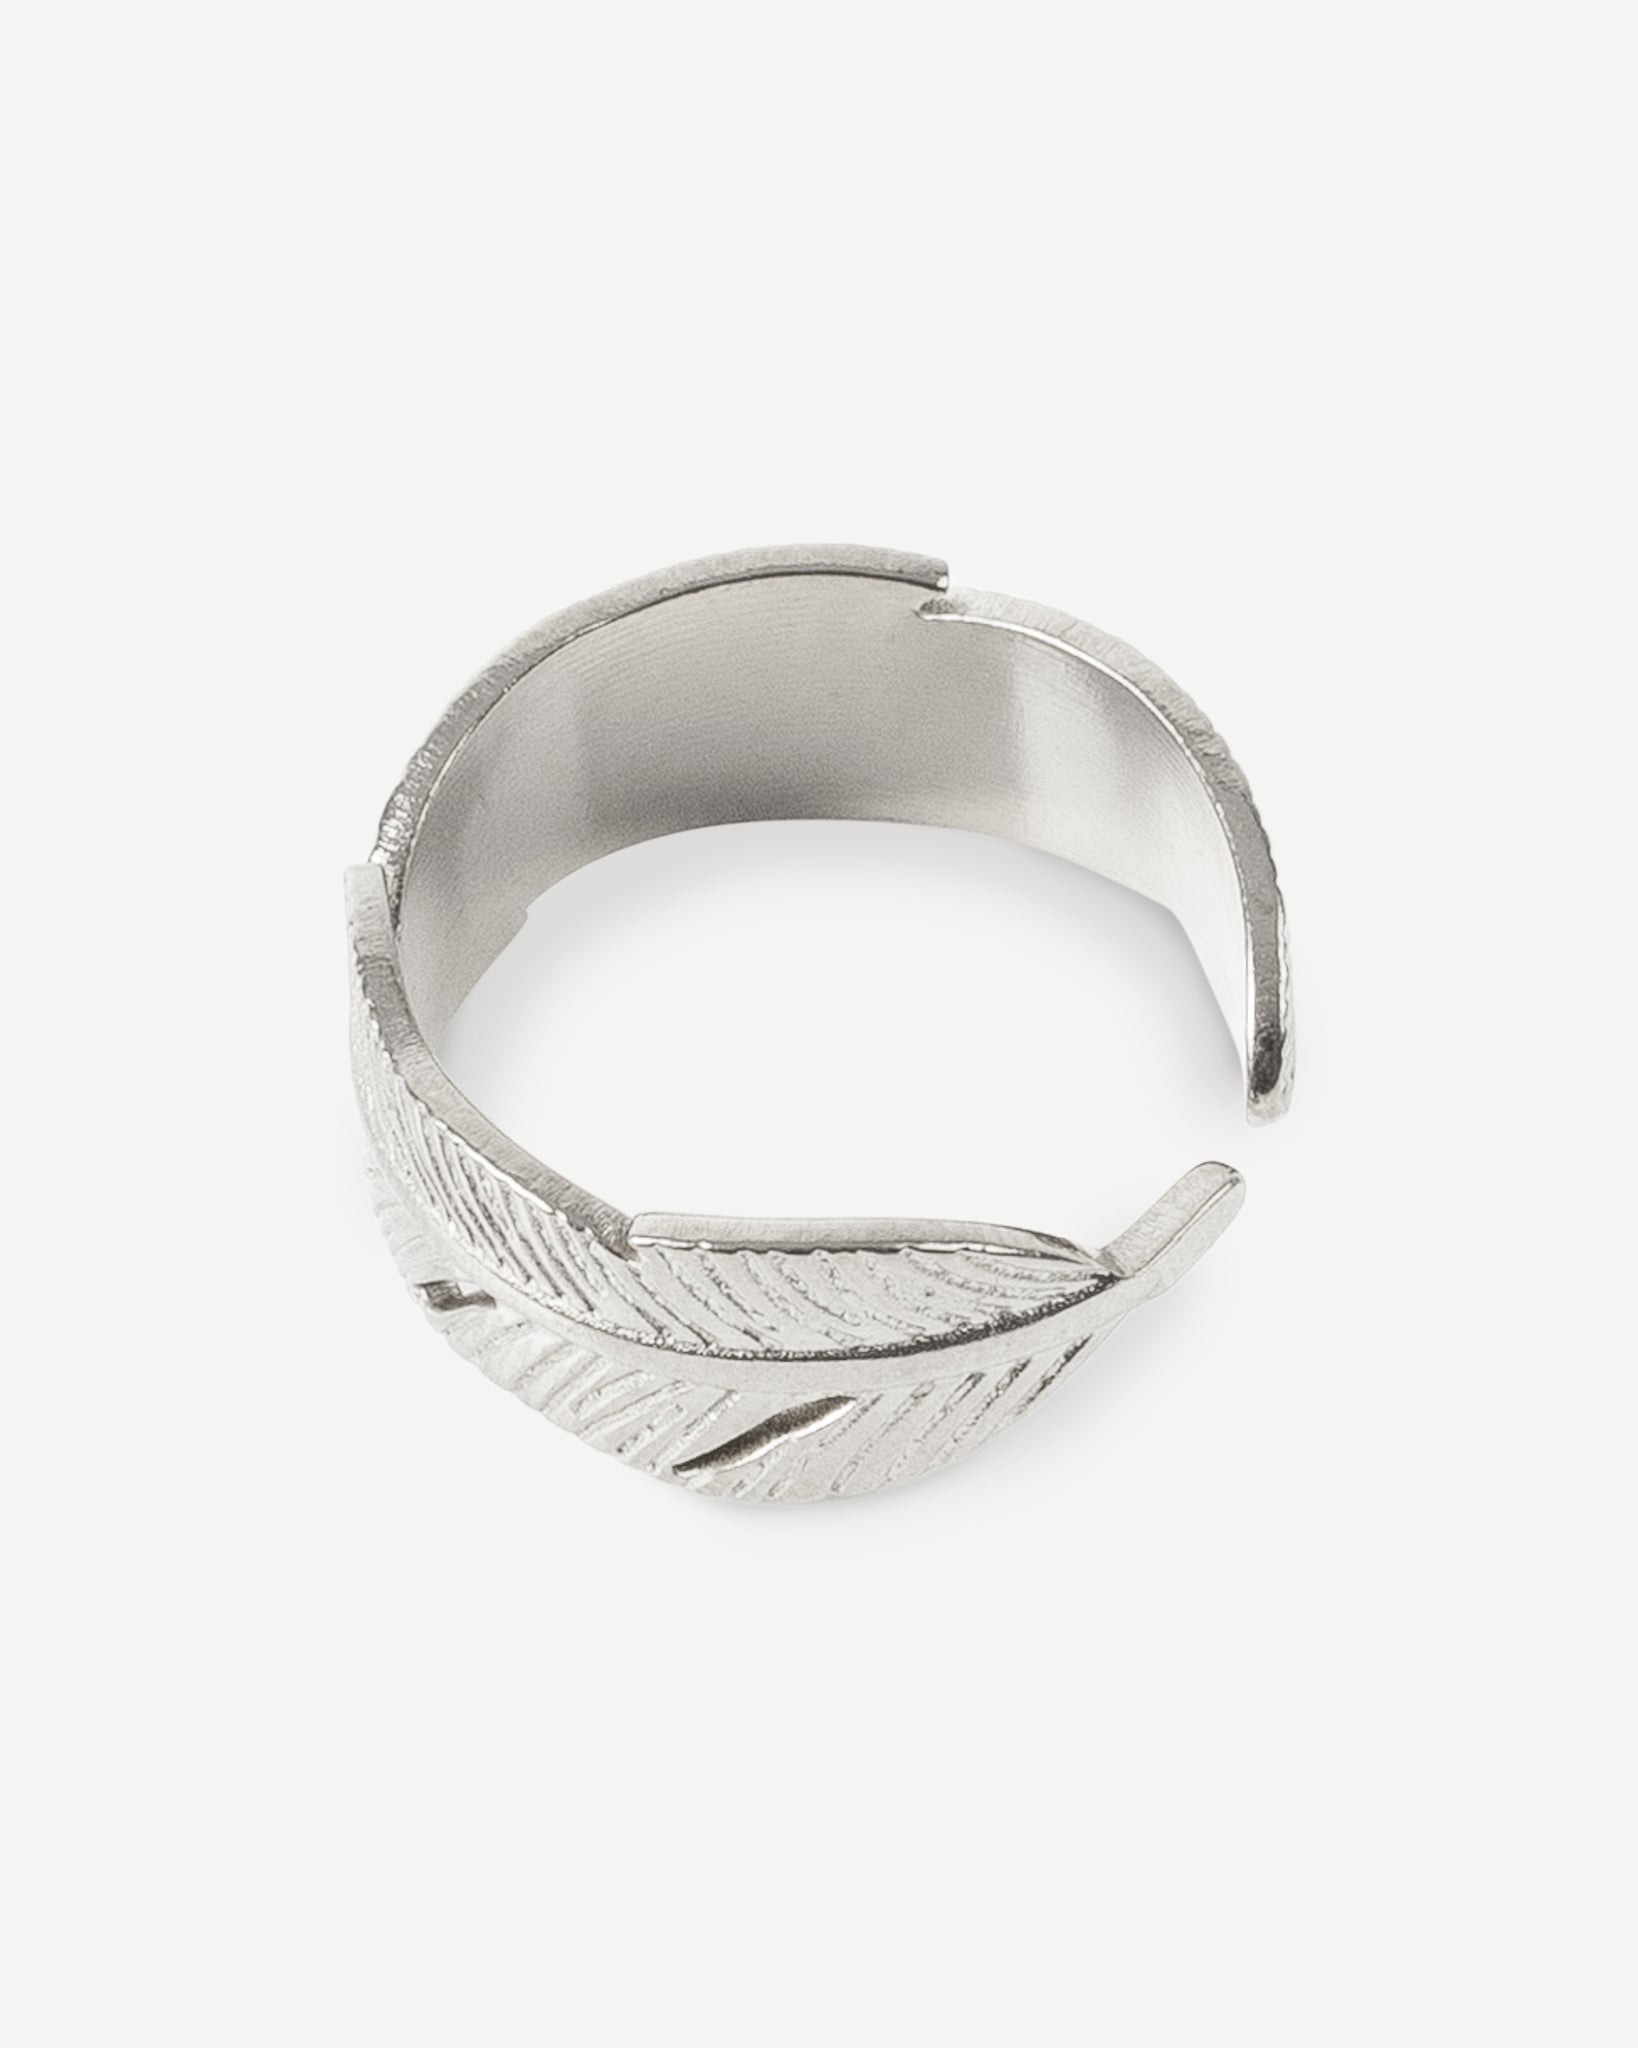 Free Spirit Feather Silver Ring